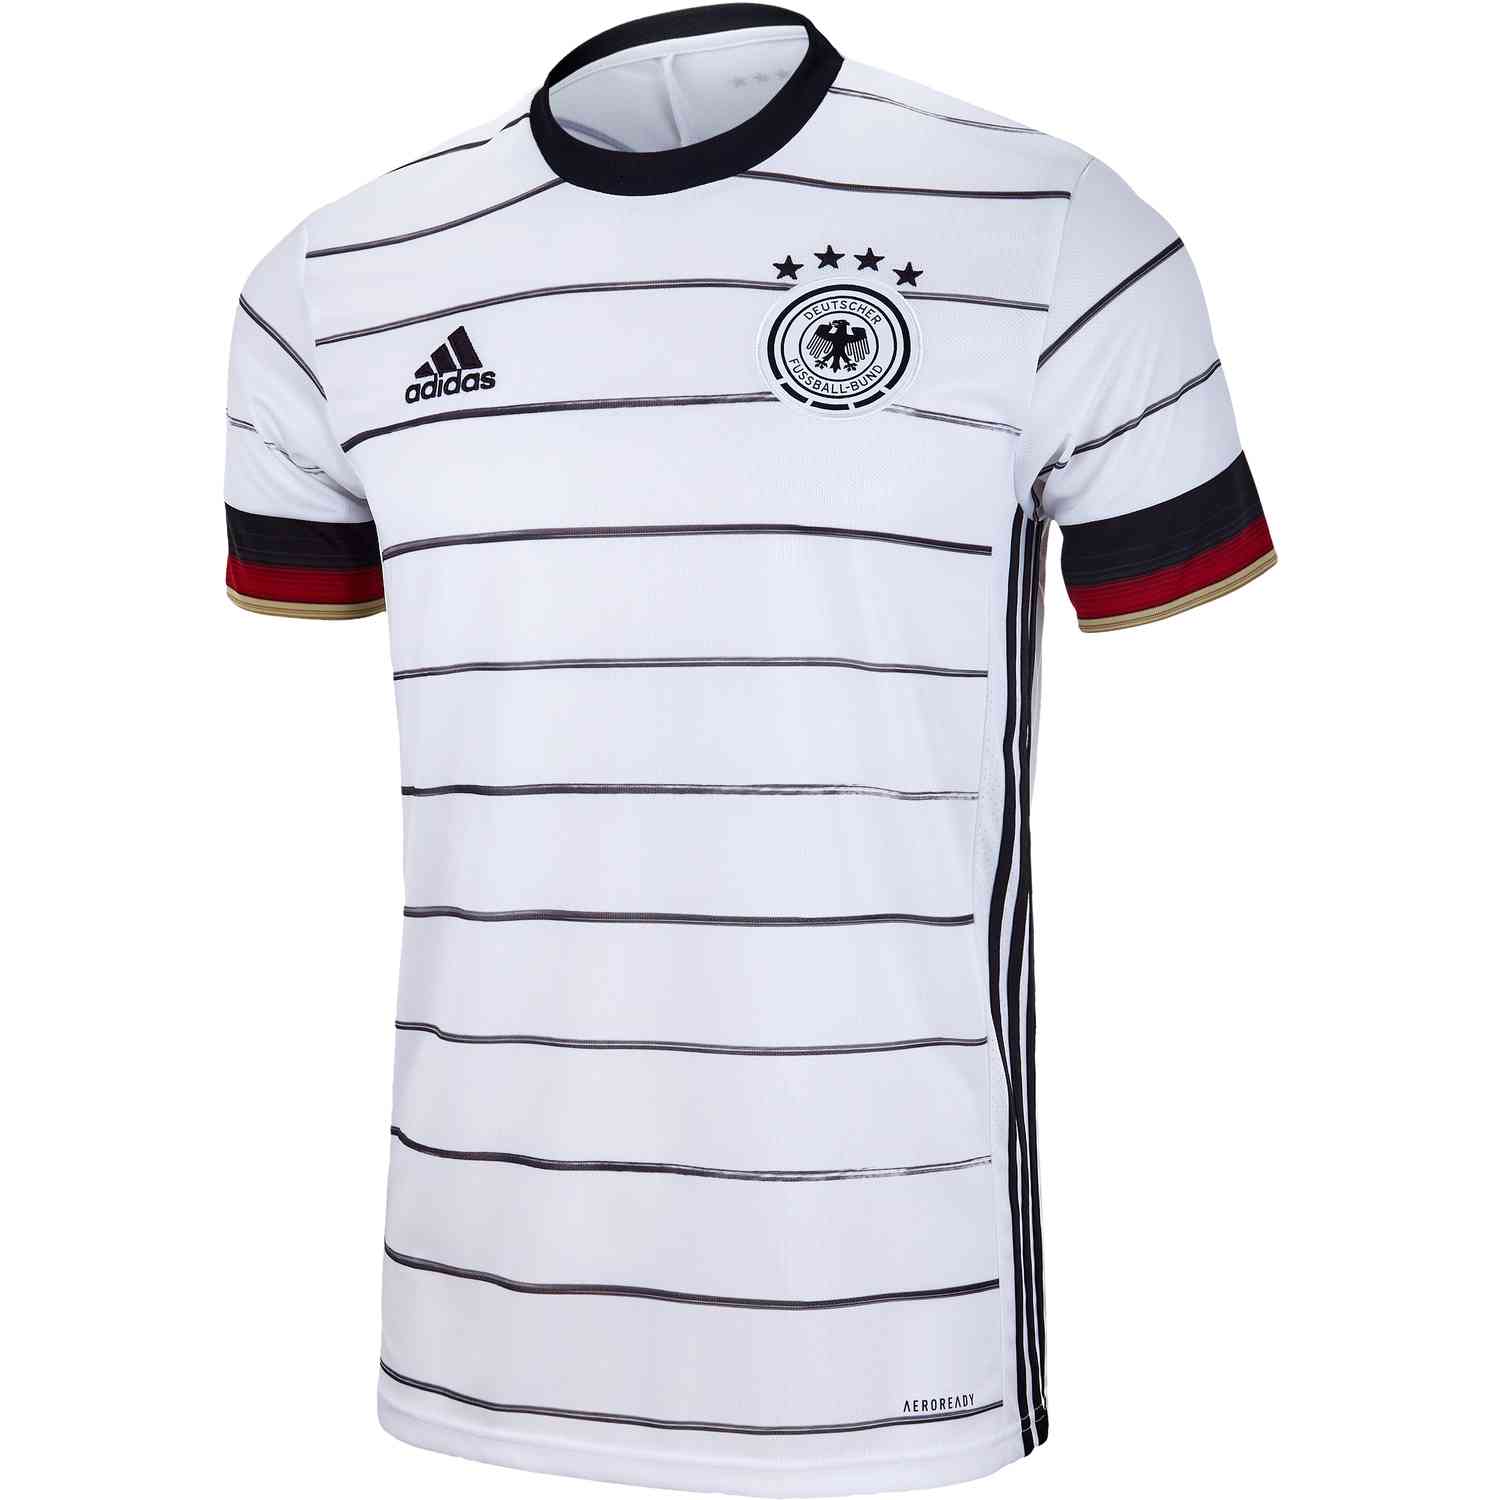 adidas soccer jersey fit